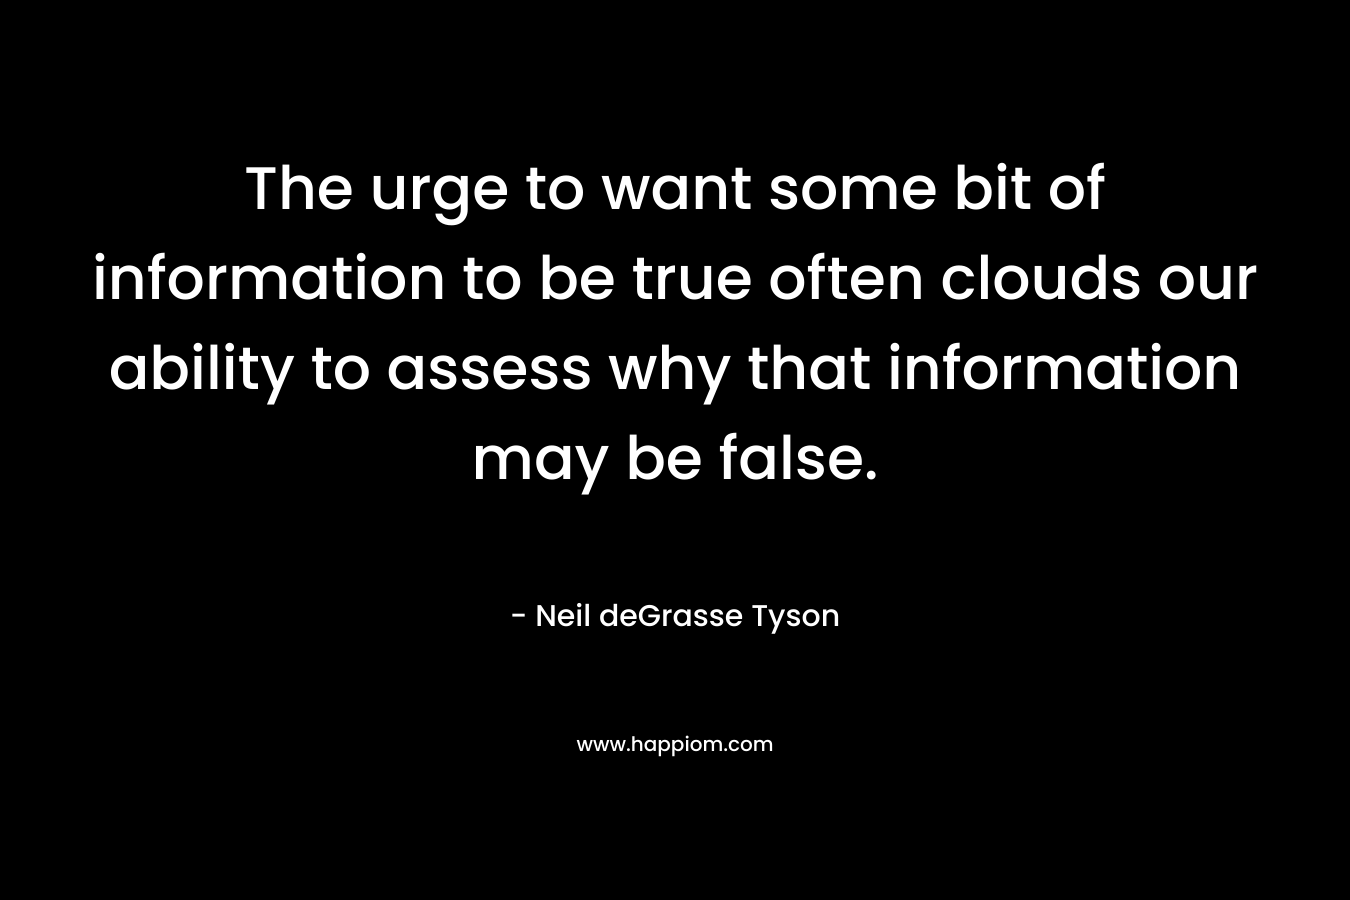 The urge to want some bit of information to be true often clouds our ability to assess why that information may be false.